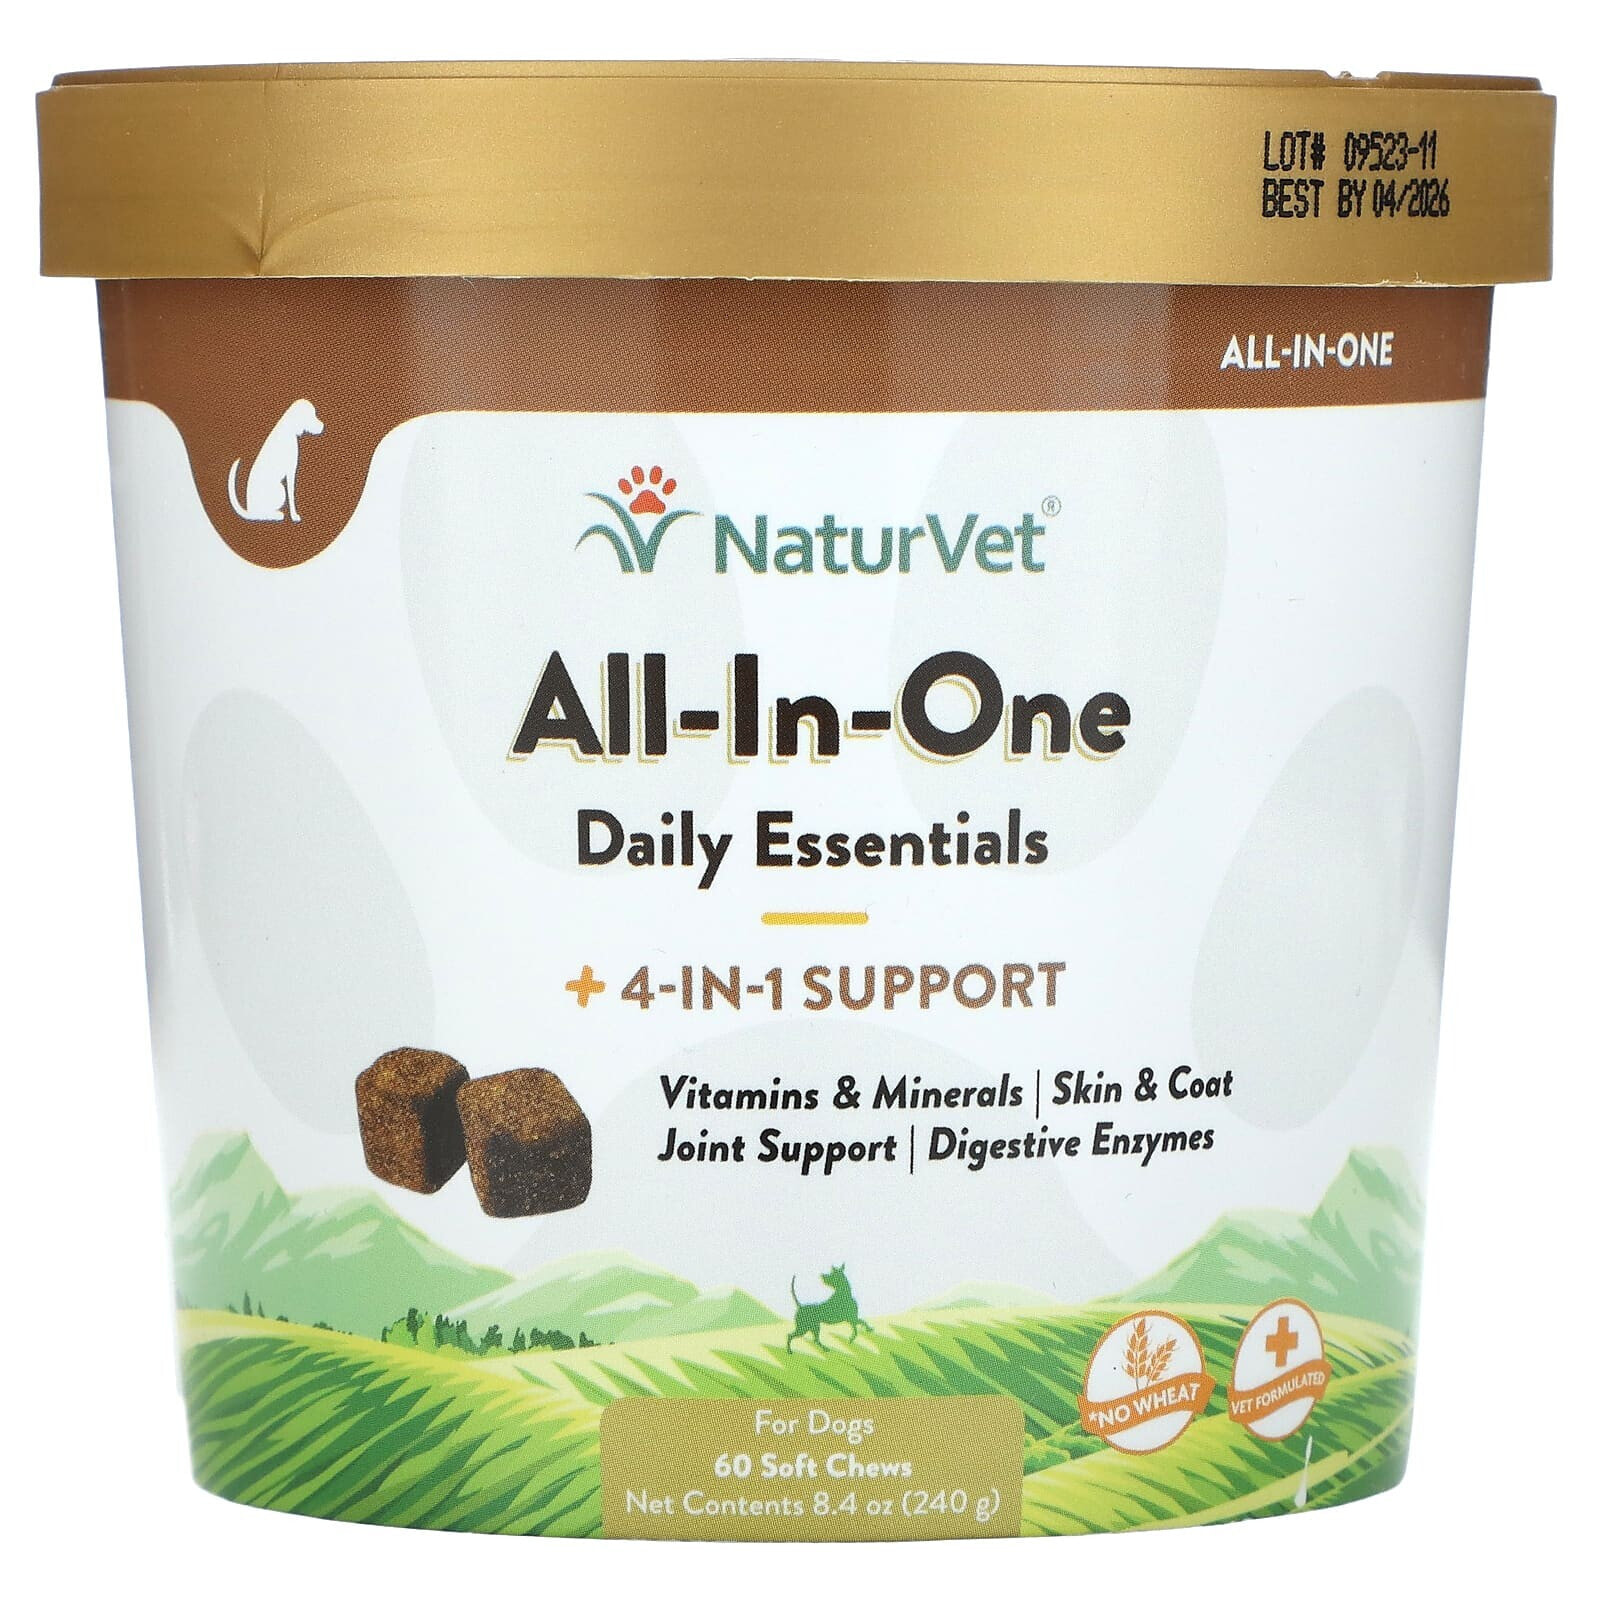 All-In-One, For Dogs, 120 Soft Chews, 16.9 oz (480 g)